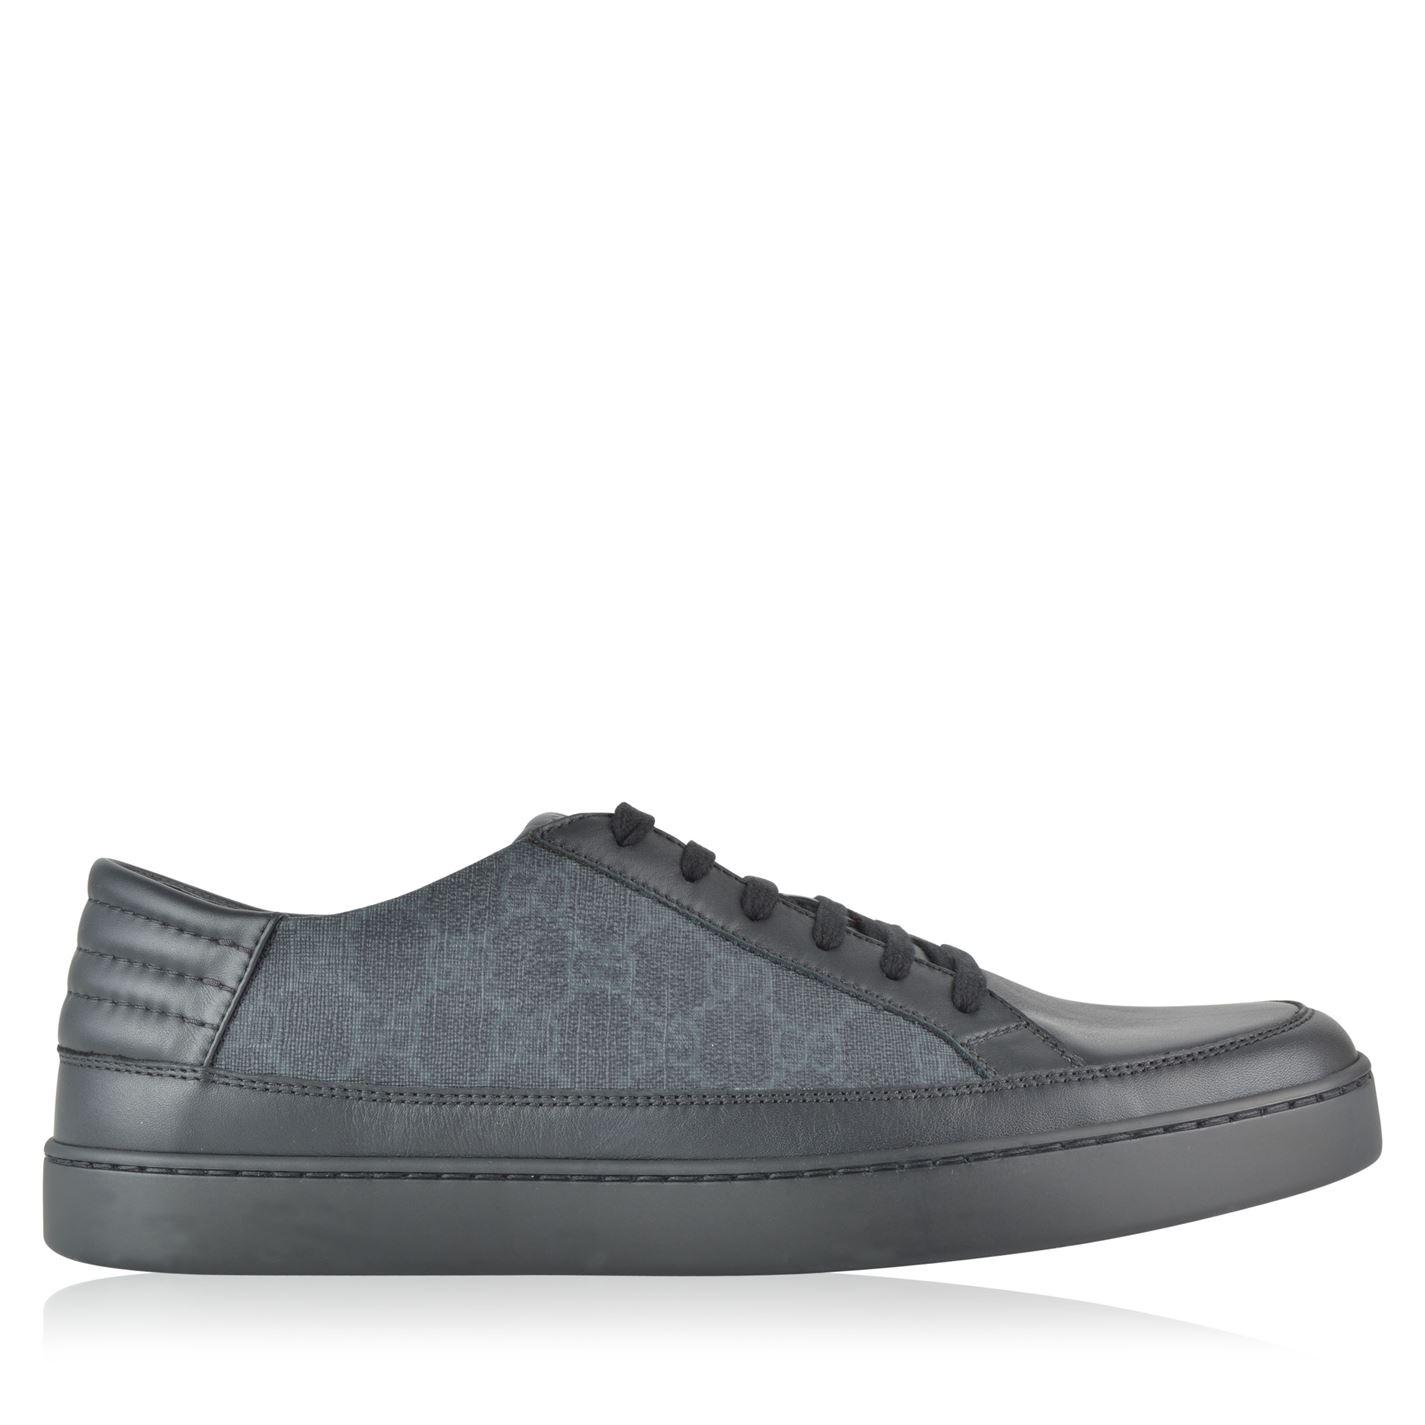 Gucci Common Low Gg Supreme Trainers in Black for Men - Lyst